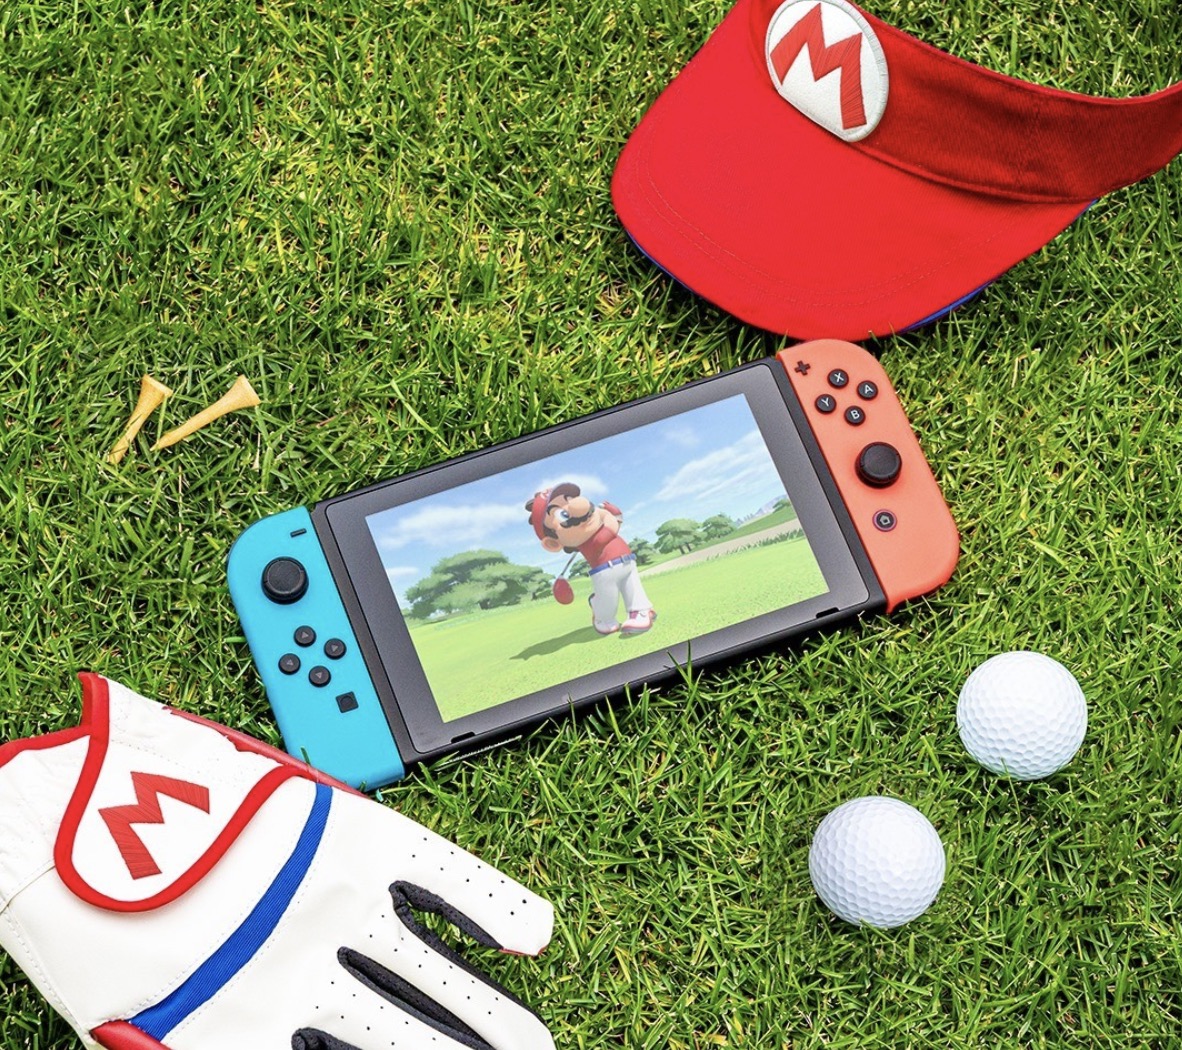 A Game Of Mario Golf: Super Rush With Mike Weir - View the VIBE Toronto